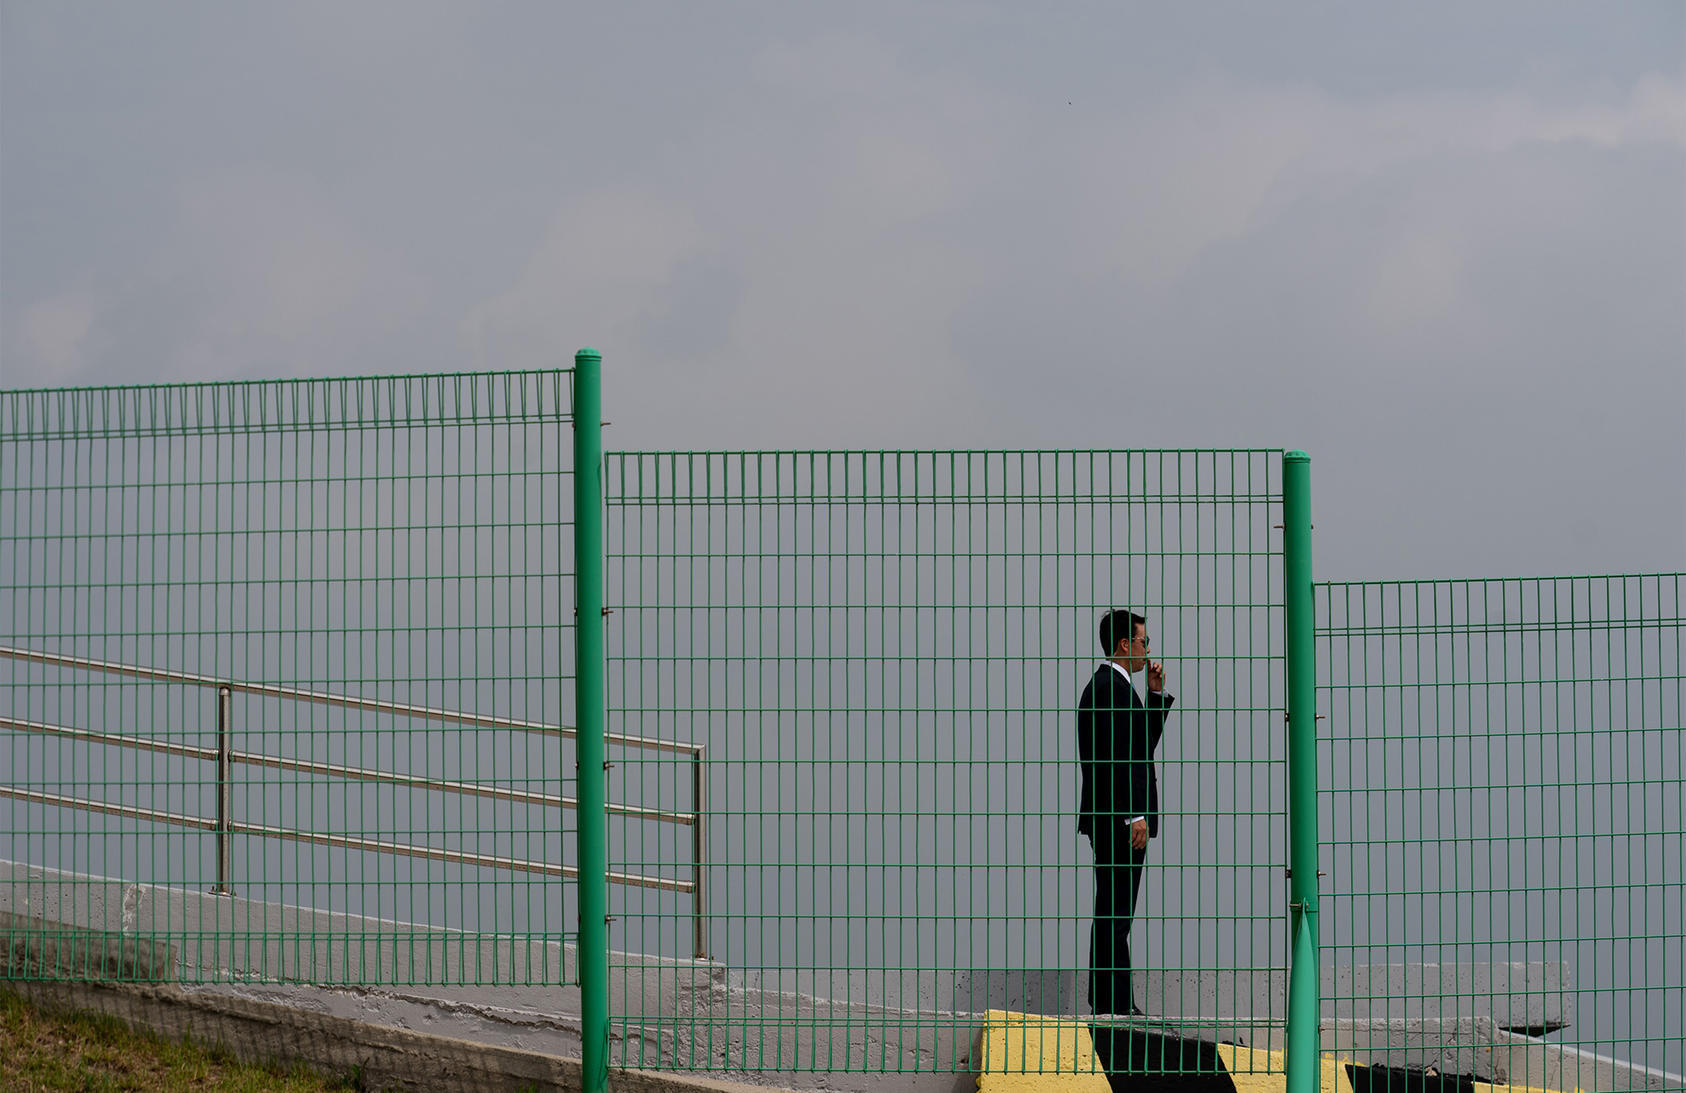 A Secret Service agent stands watch as President Donald Trump arrives at Observation Post Ouellette to view North Korea along the Demilitarized Zone at Camp Bonifas in South Korea, June 30, 2019. (Erin Schaff/The New York Times)